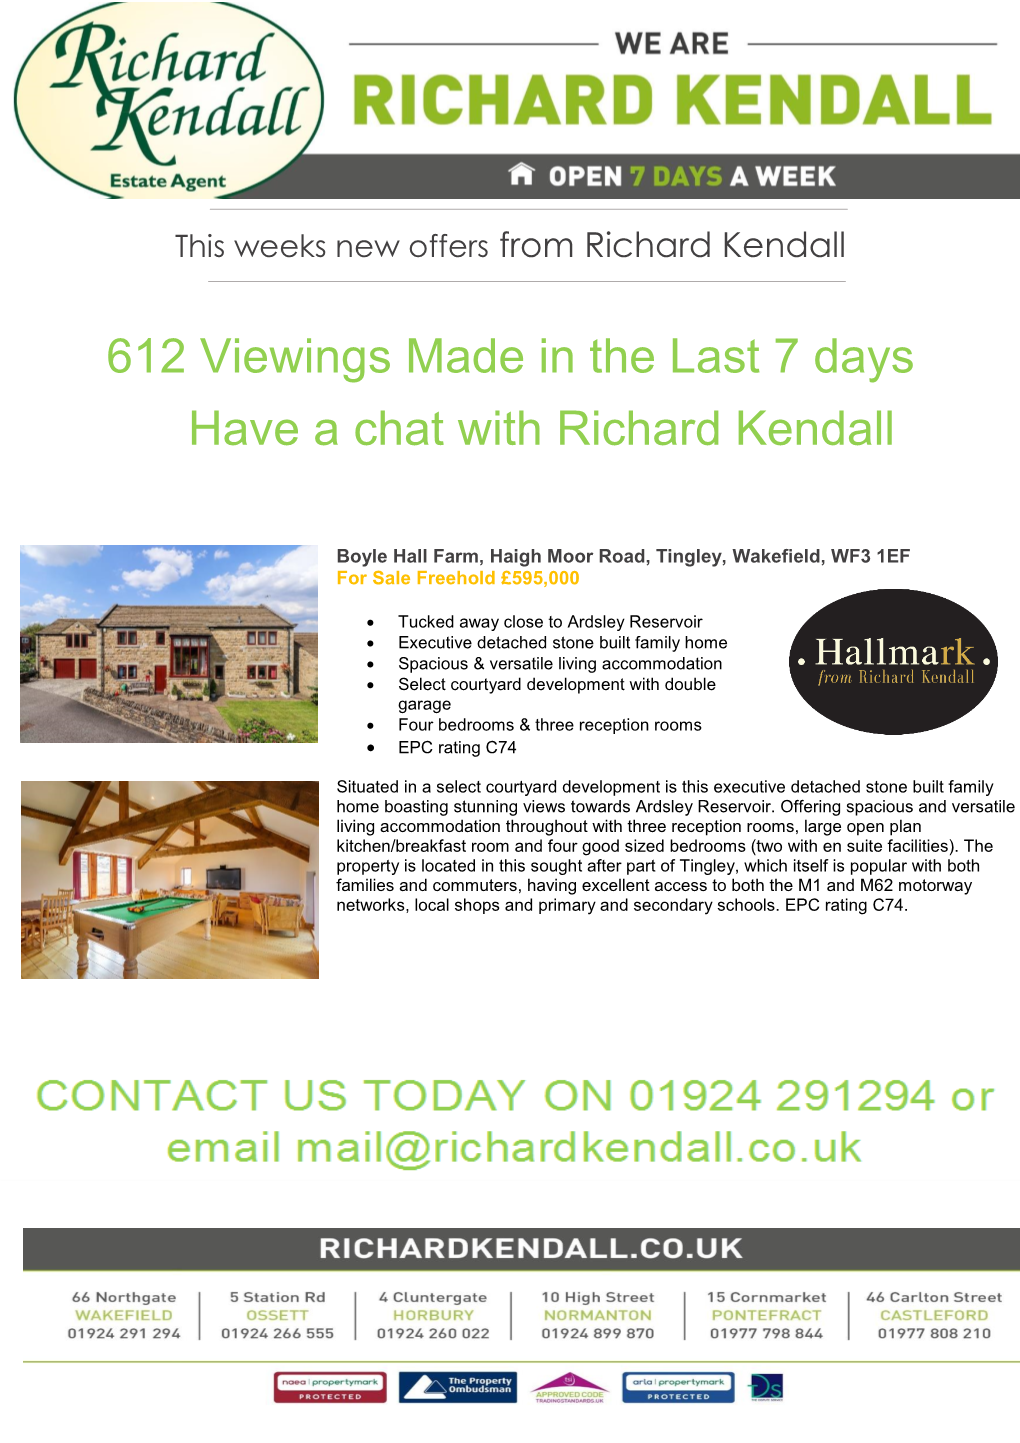 612 Viewings Made in the Last 7 Days Have a Chat with Richard Kendall